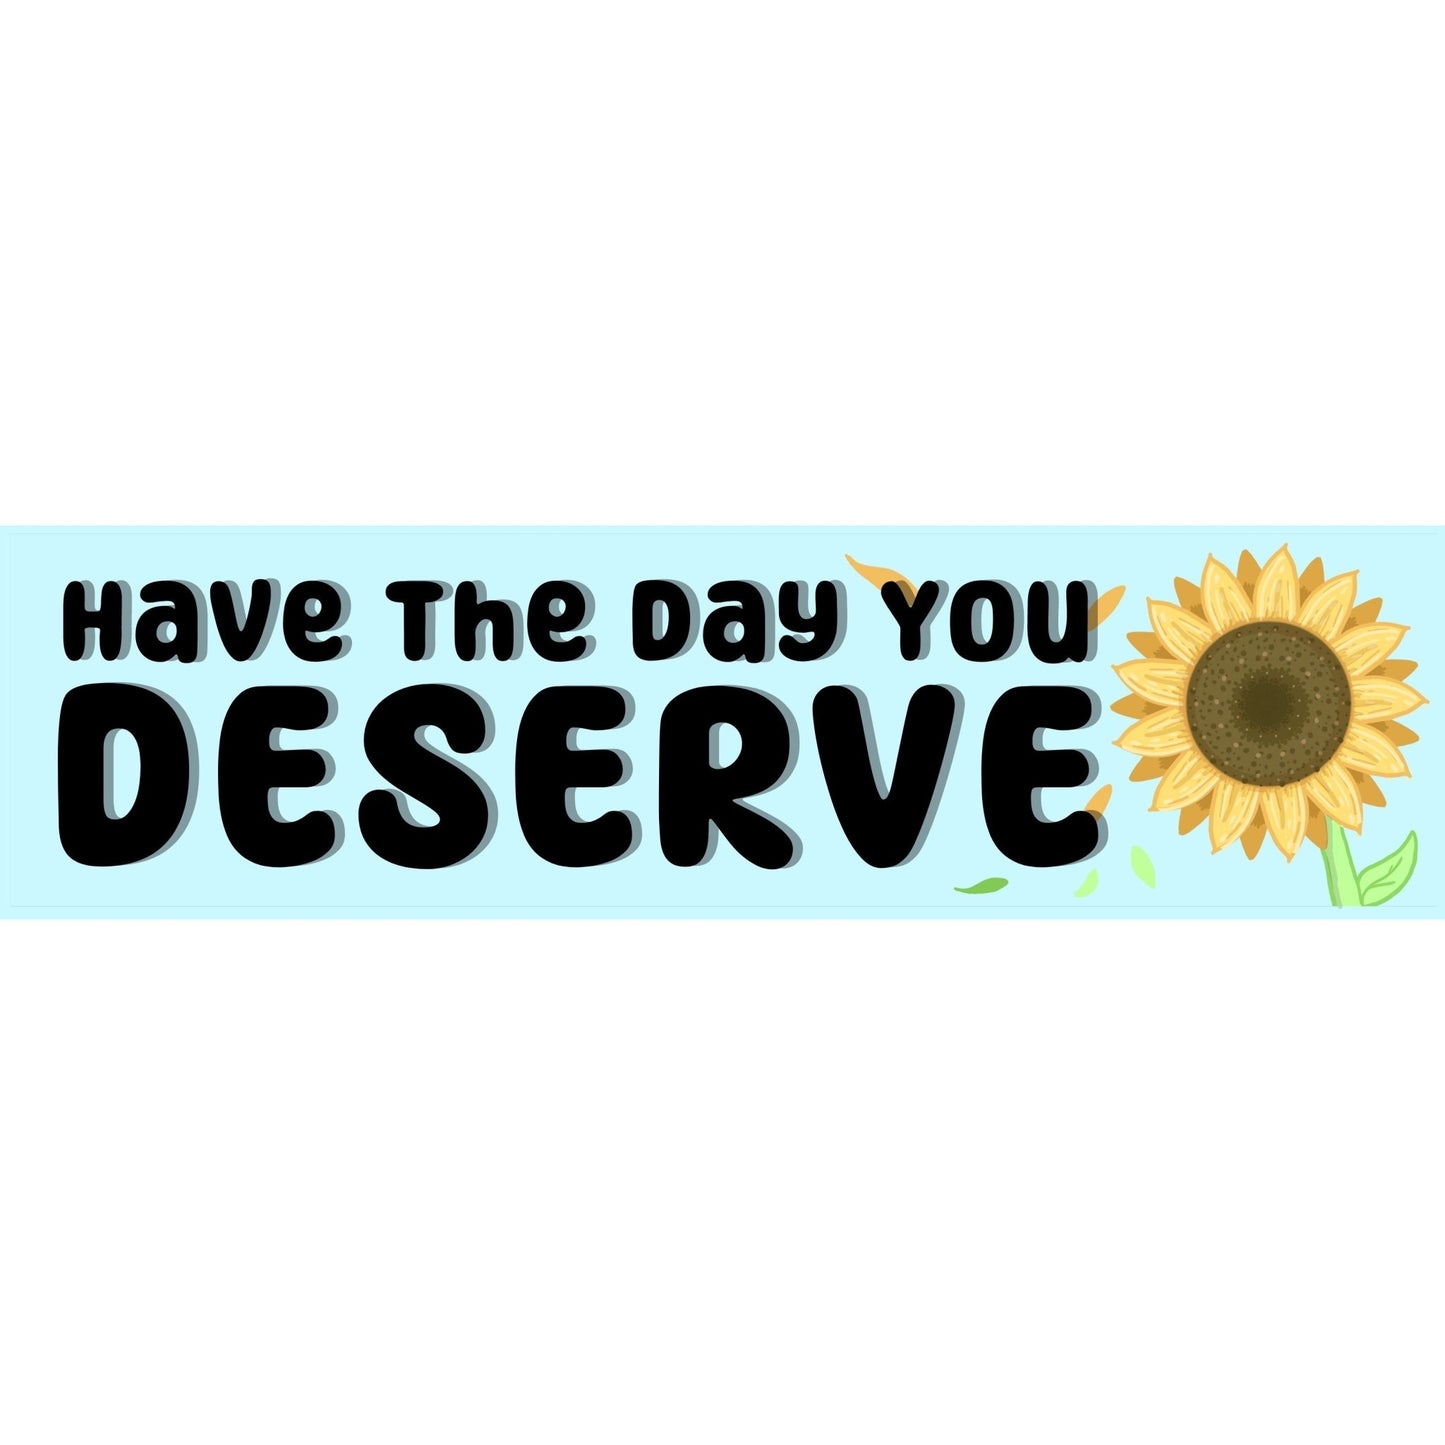 Have the Day you Deserve Bumper-Sticker | 3"x11" | Deviant Kreations - Deviantkreations